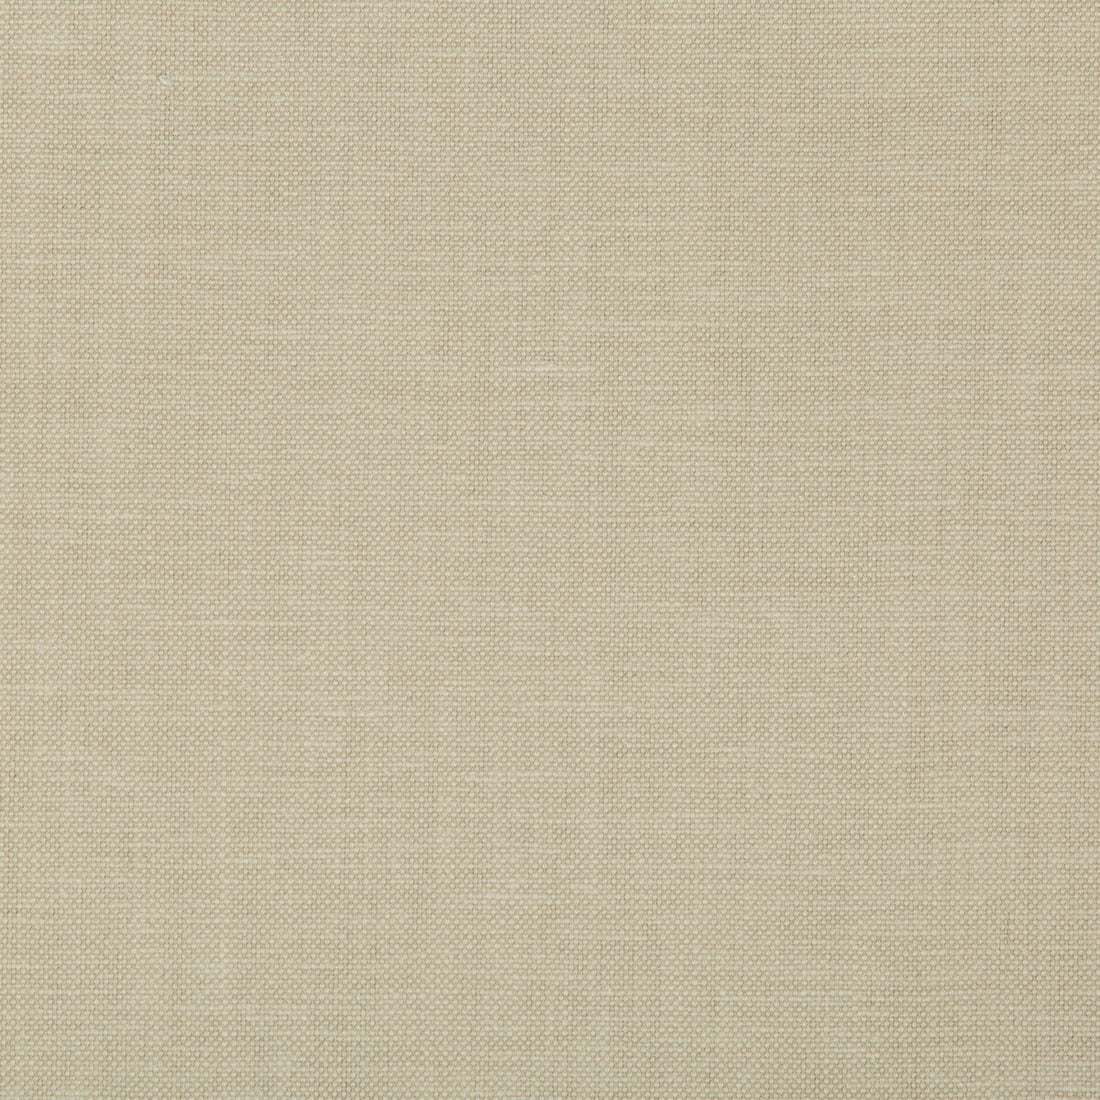 Oxfordian fabric in flax color - pattern 35543.16.0 - by Kravet Basics in the Bermuda collection